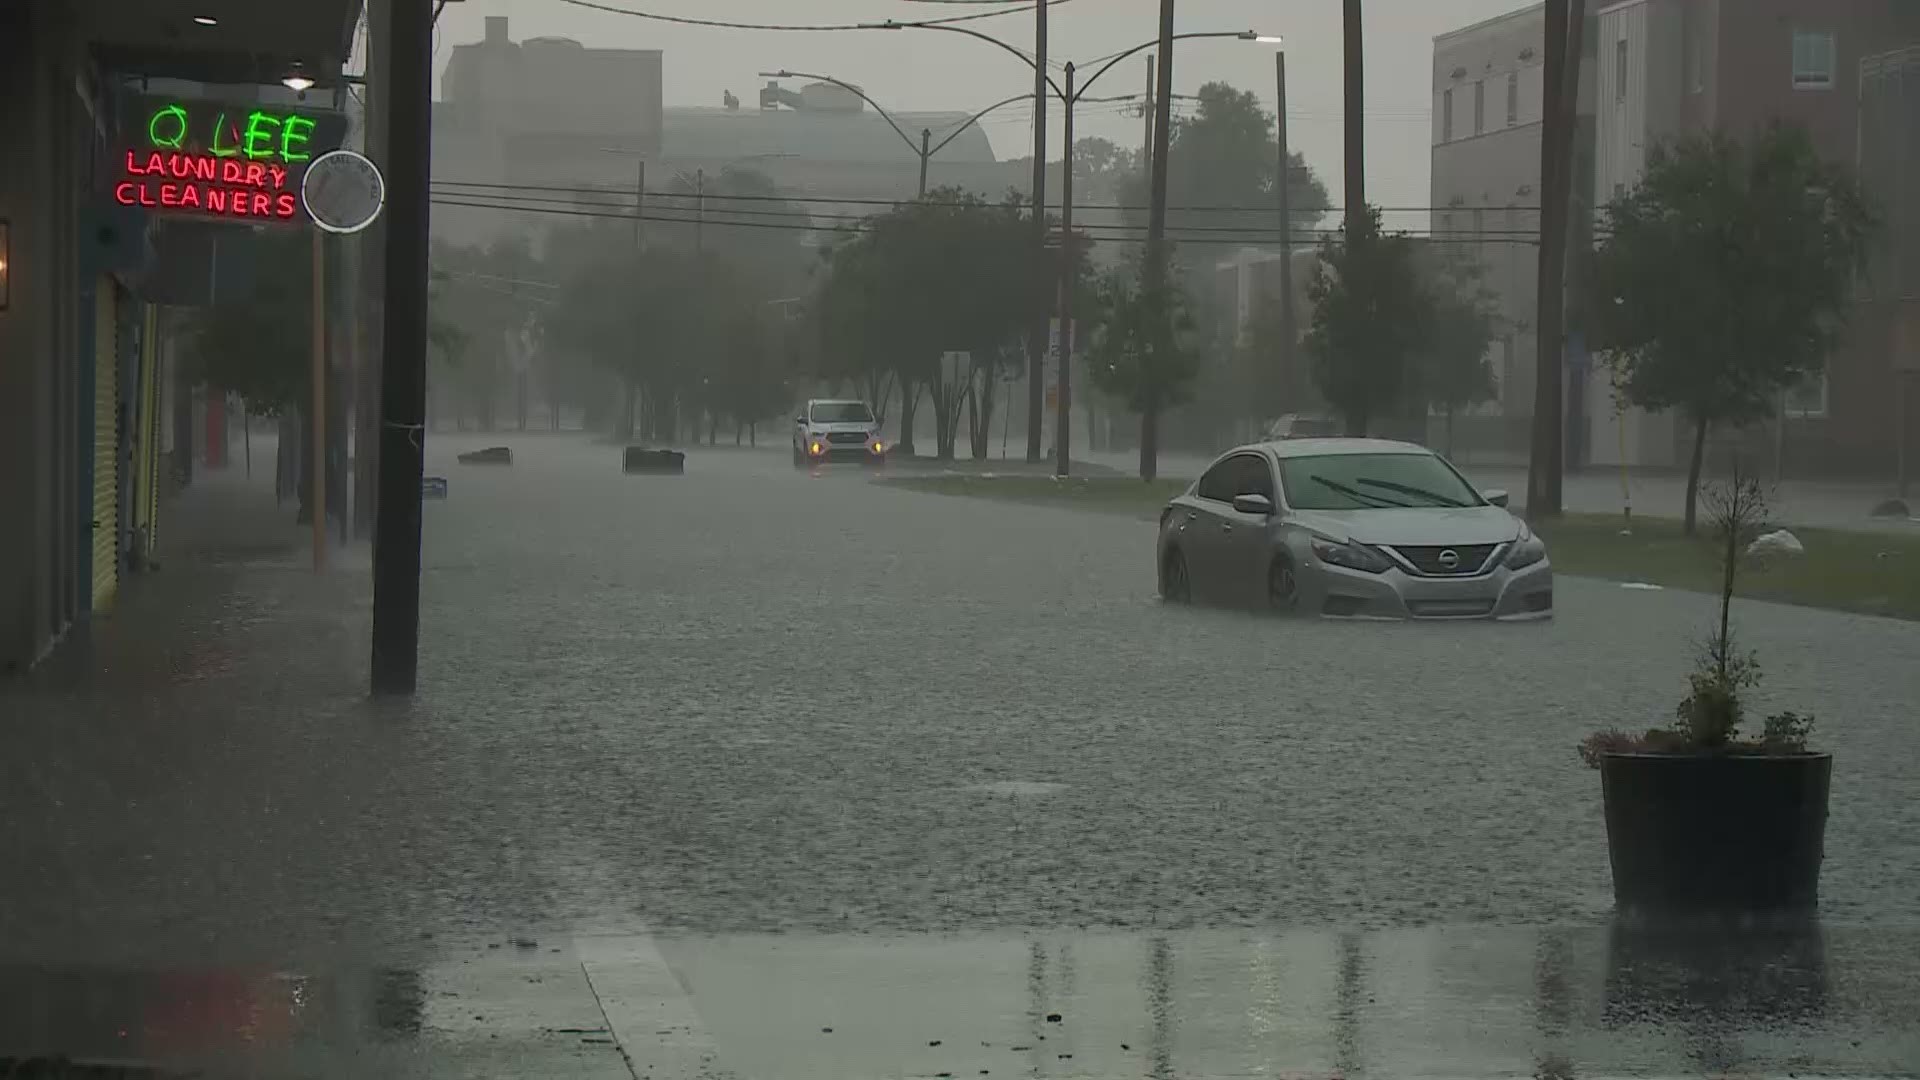 Video from the May 12 flood shot in Gentilly, Mid-City and Treme.